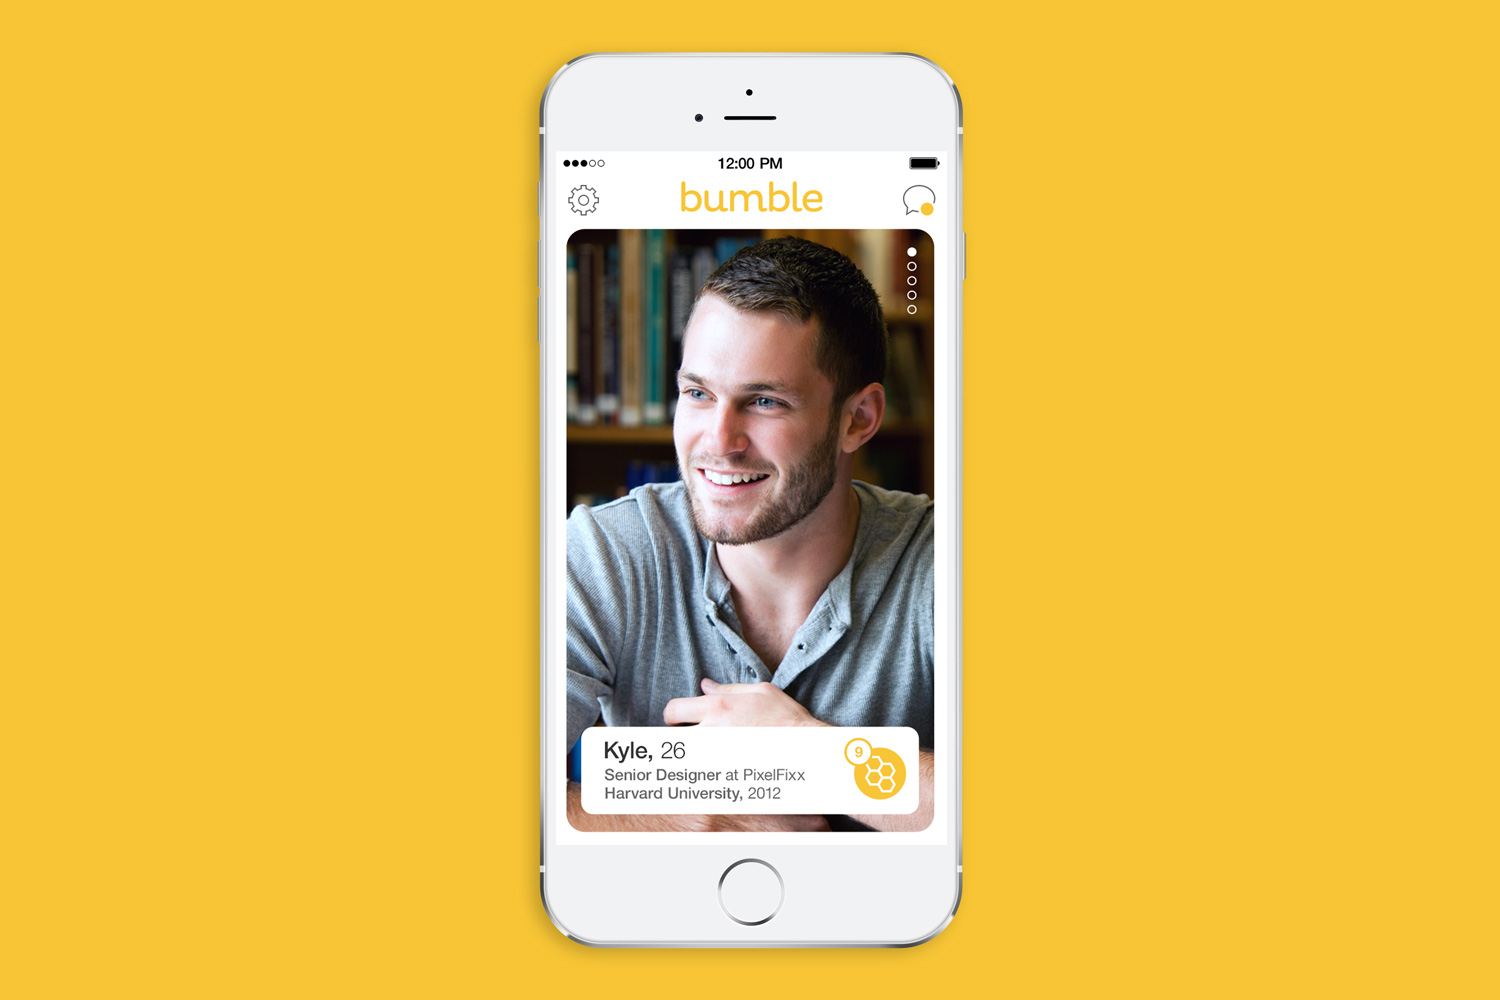 bumble bff mode dating app 6